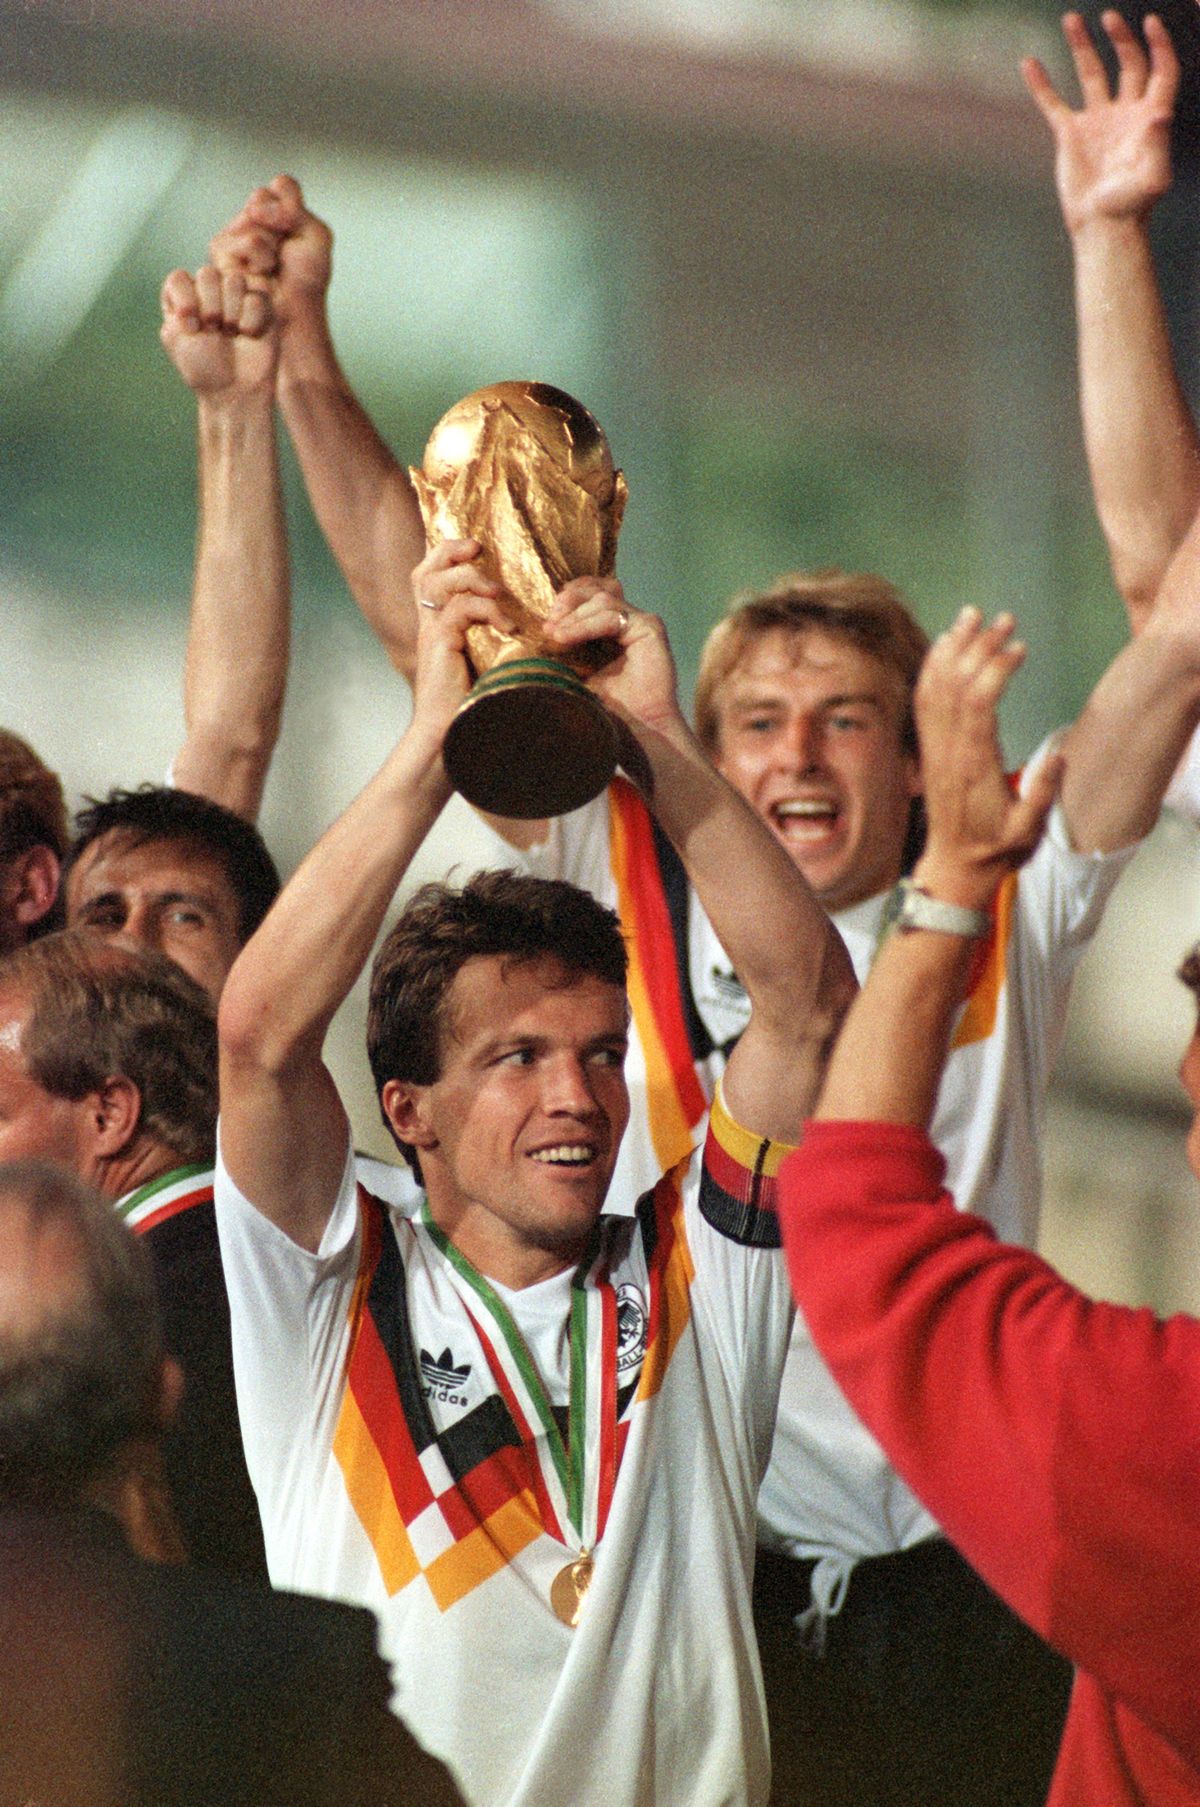 Soccer World Cup 1990: Lothar MatthaeusSoccer World Cup 1990: Lothar MatthaeusGerman team captain Lothar Matthaeus lifts up the World Cup triumphantly at the presentation ceremony for his team at Olympic Stadium in Rome, Italy on 08 July 1990. Behind him can be seen goalgetter Juergen Klinsmann (R). The German national soccer team had just won the World Cup final against Argentina by a score of 1-0.


Keywords: Sport, SPO, Sport, SPO, People, soccer, male, smiling, trophy, cheering, celebrating (Photo by FRANK KLEEFELDT / DPA / dpa Picture-Alliance via AFP)Soccer World Cup 1990: Lothar MatthaeusSoccer World Cup 1990: Lothar Matthaeus